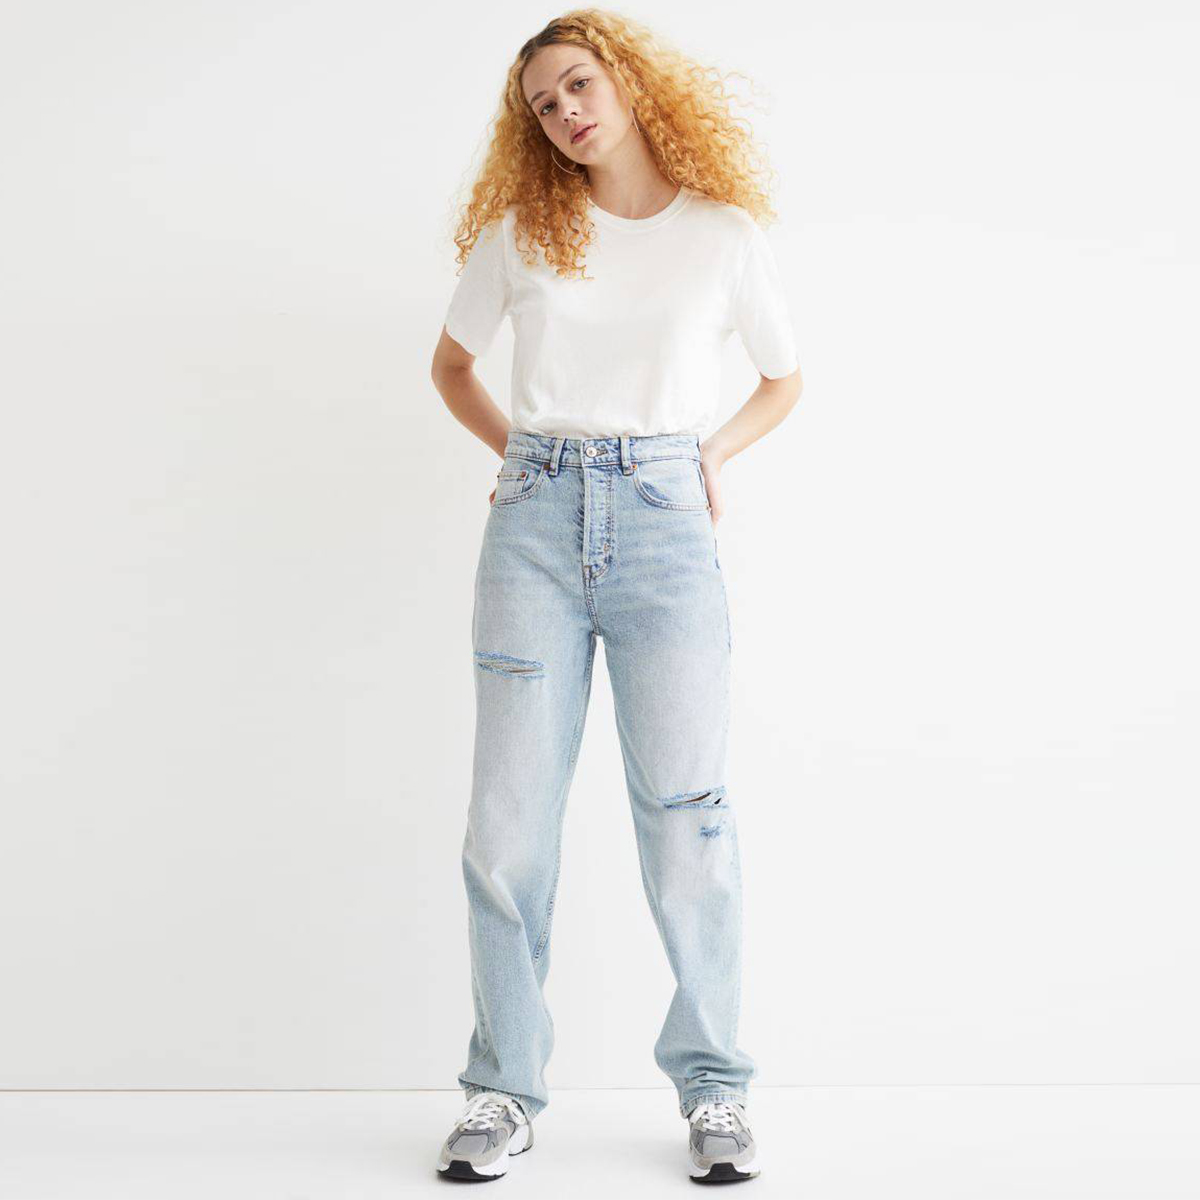 12 Pairs of H&M Denim to Wear for Fall | Who What Wear